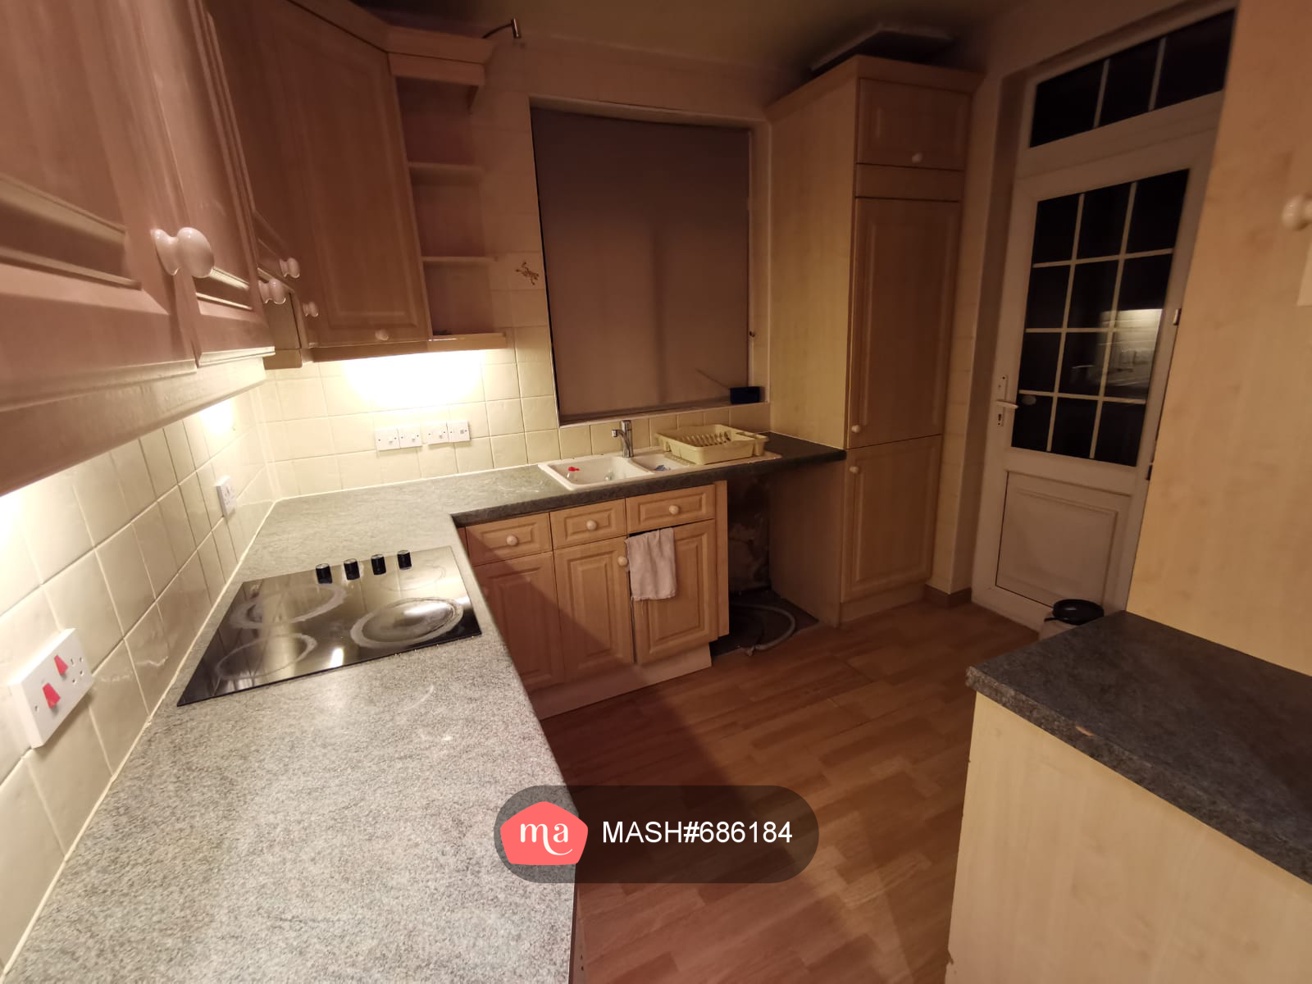 3 Bedroom Semi-detached to rent in Ilford - Mashroom